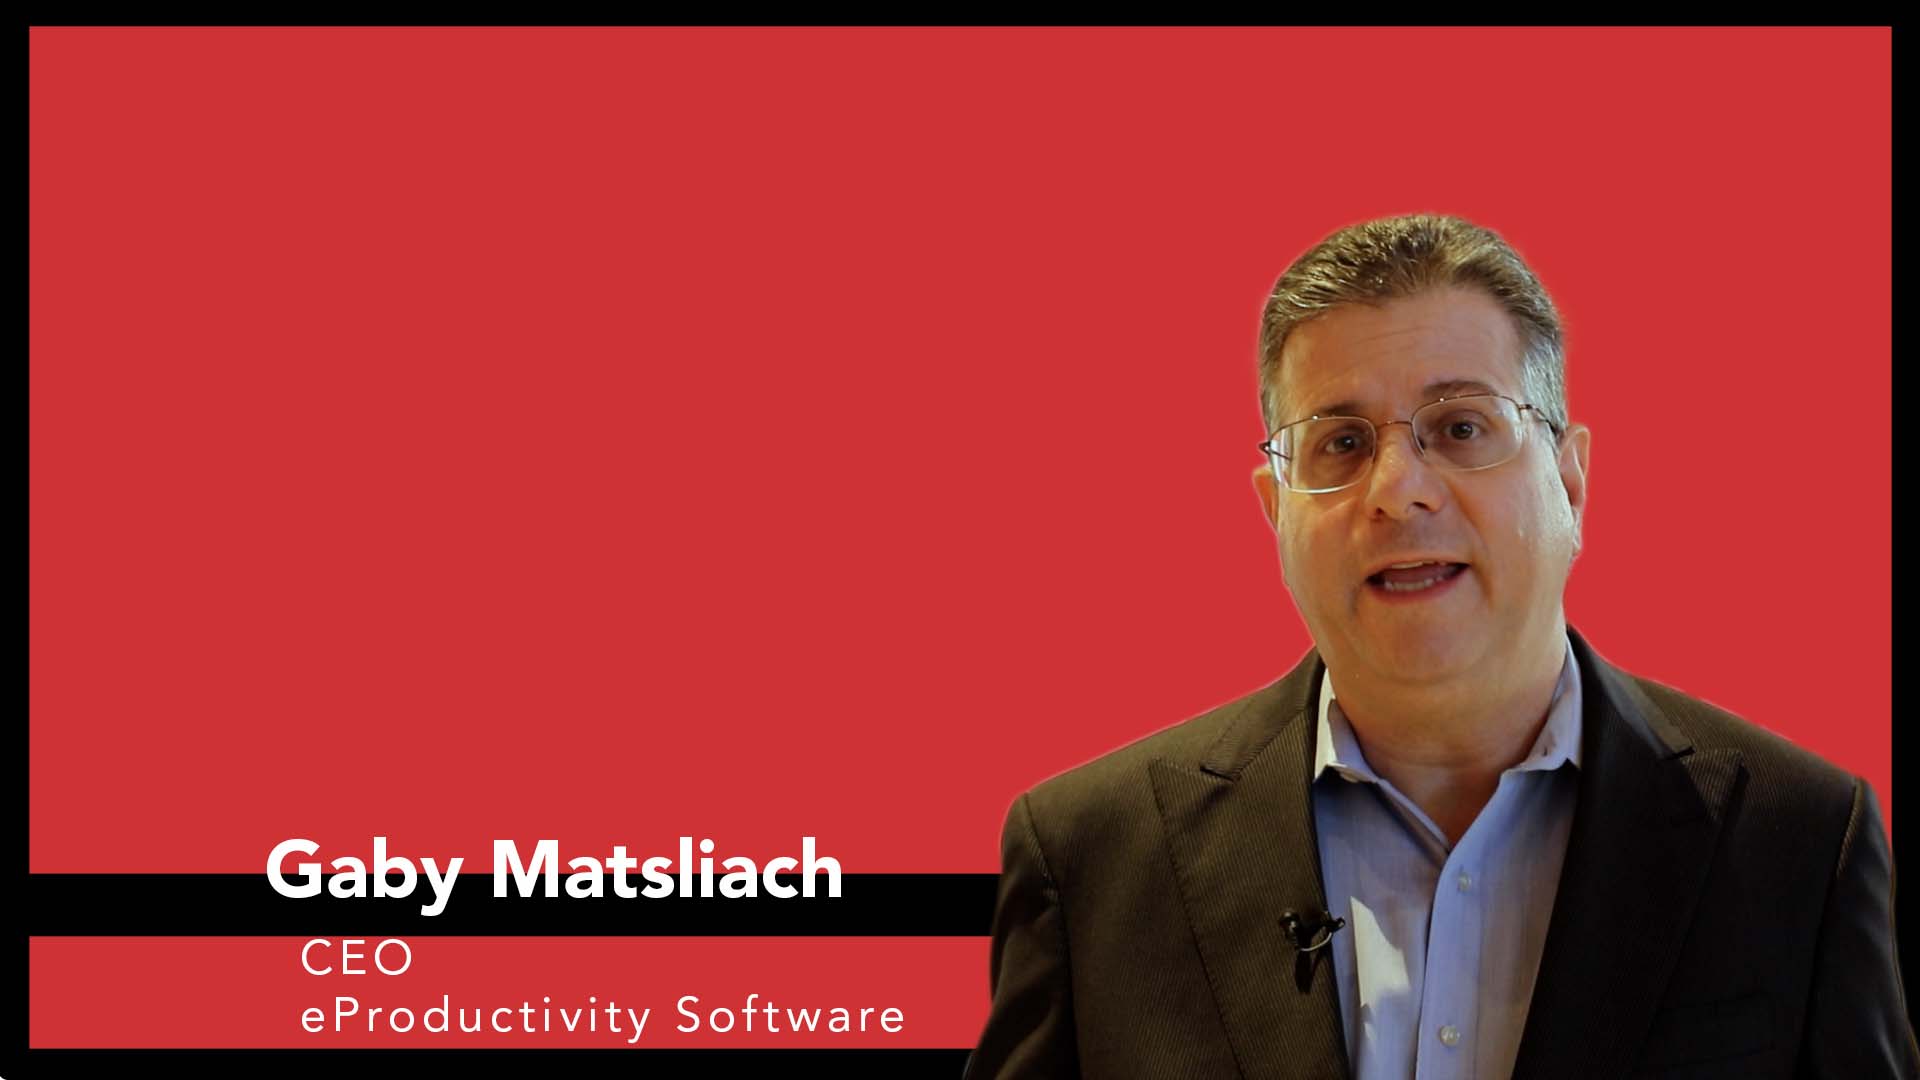 Gaby Matsliach on the eProductivity Software Spinoff